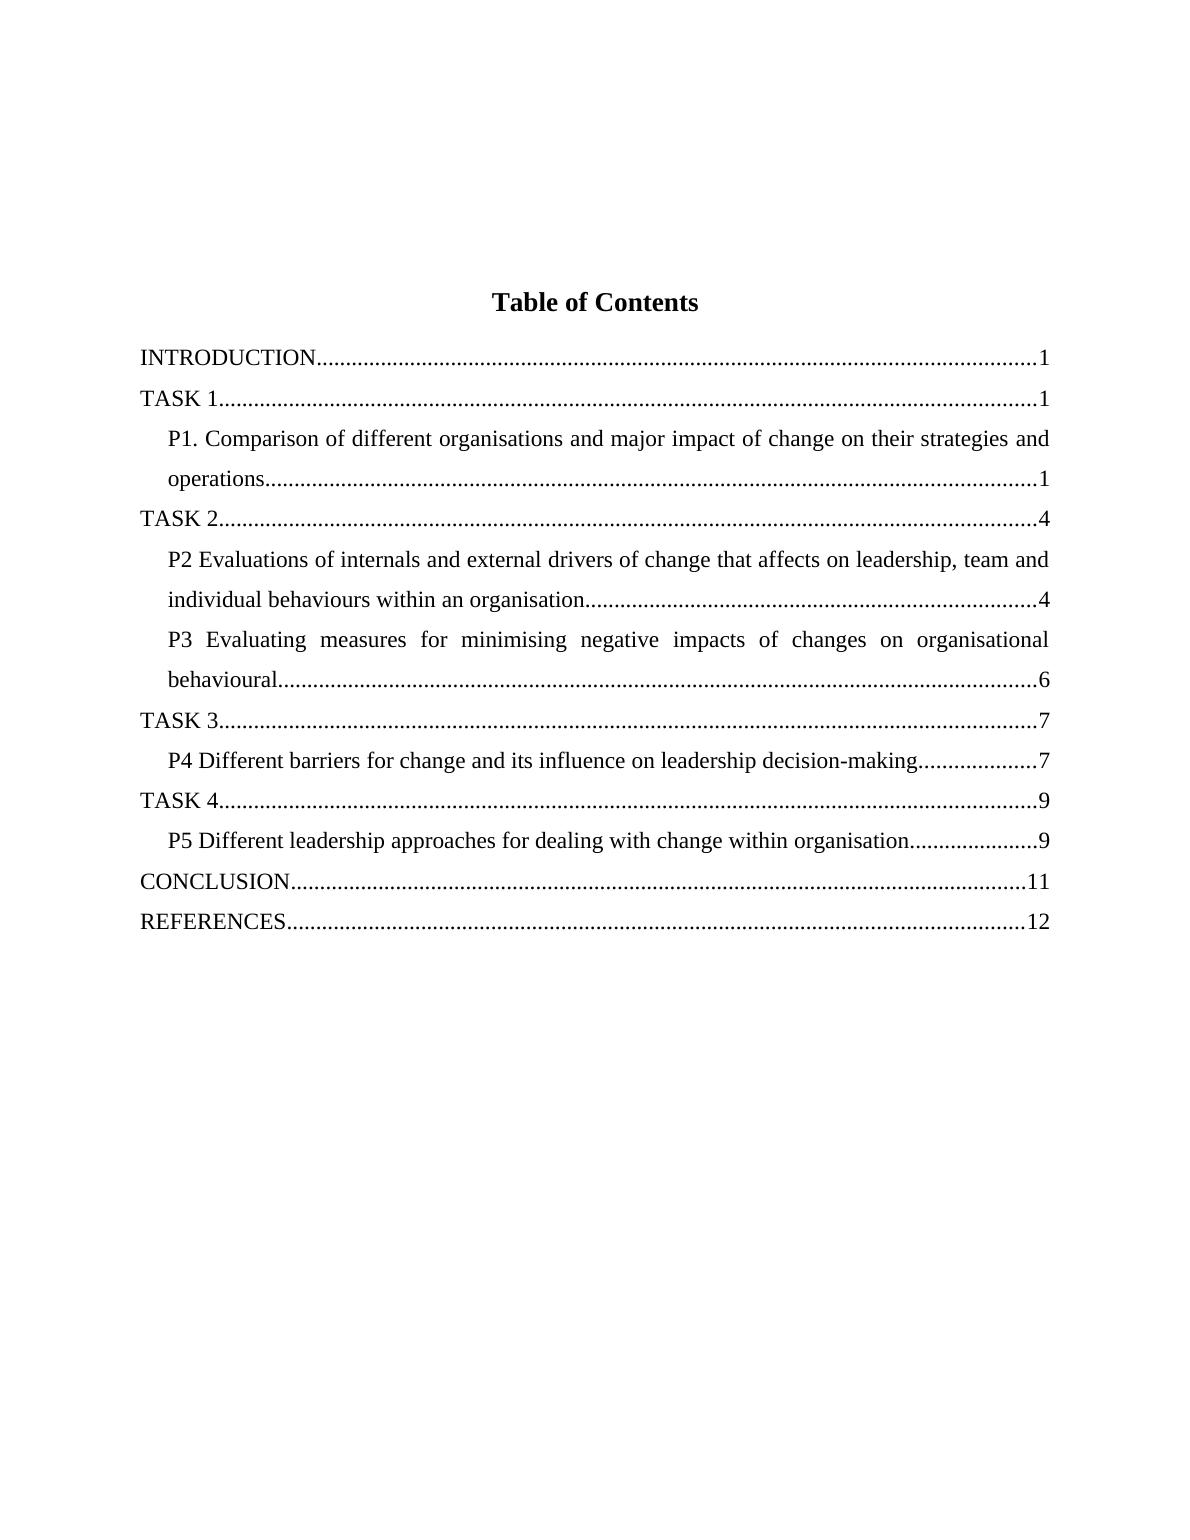 Report on Impact of Change in Organisation's Strategies and Operations : Apple Inc & Samsung_2